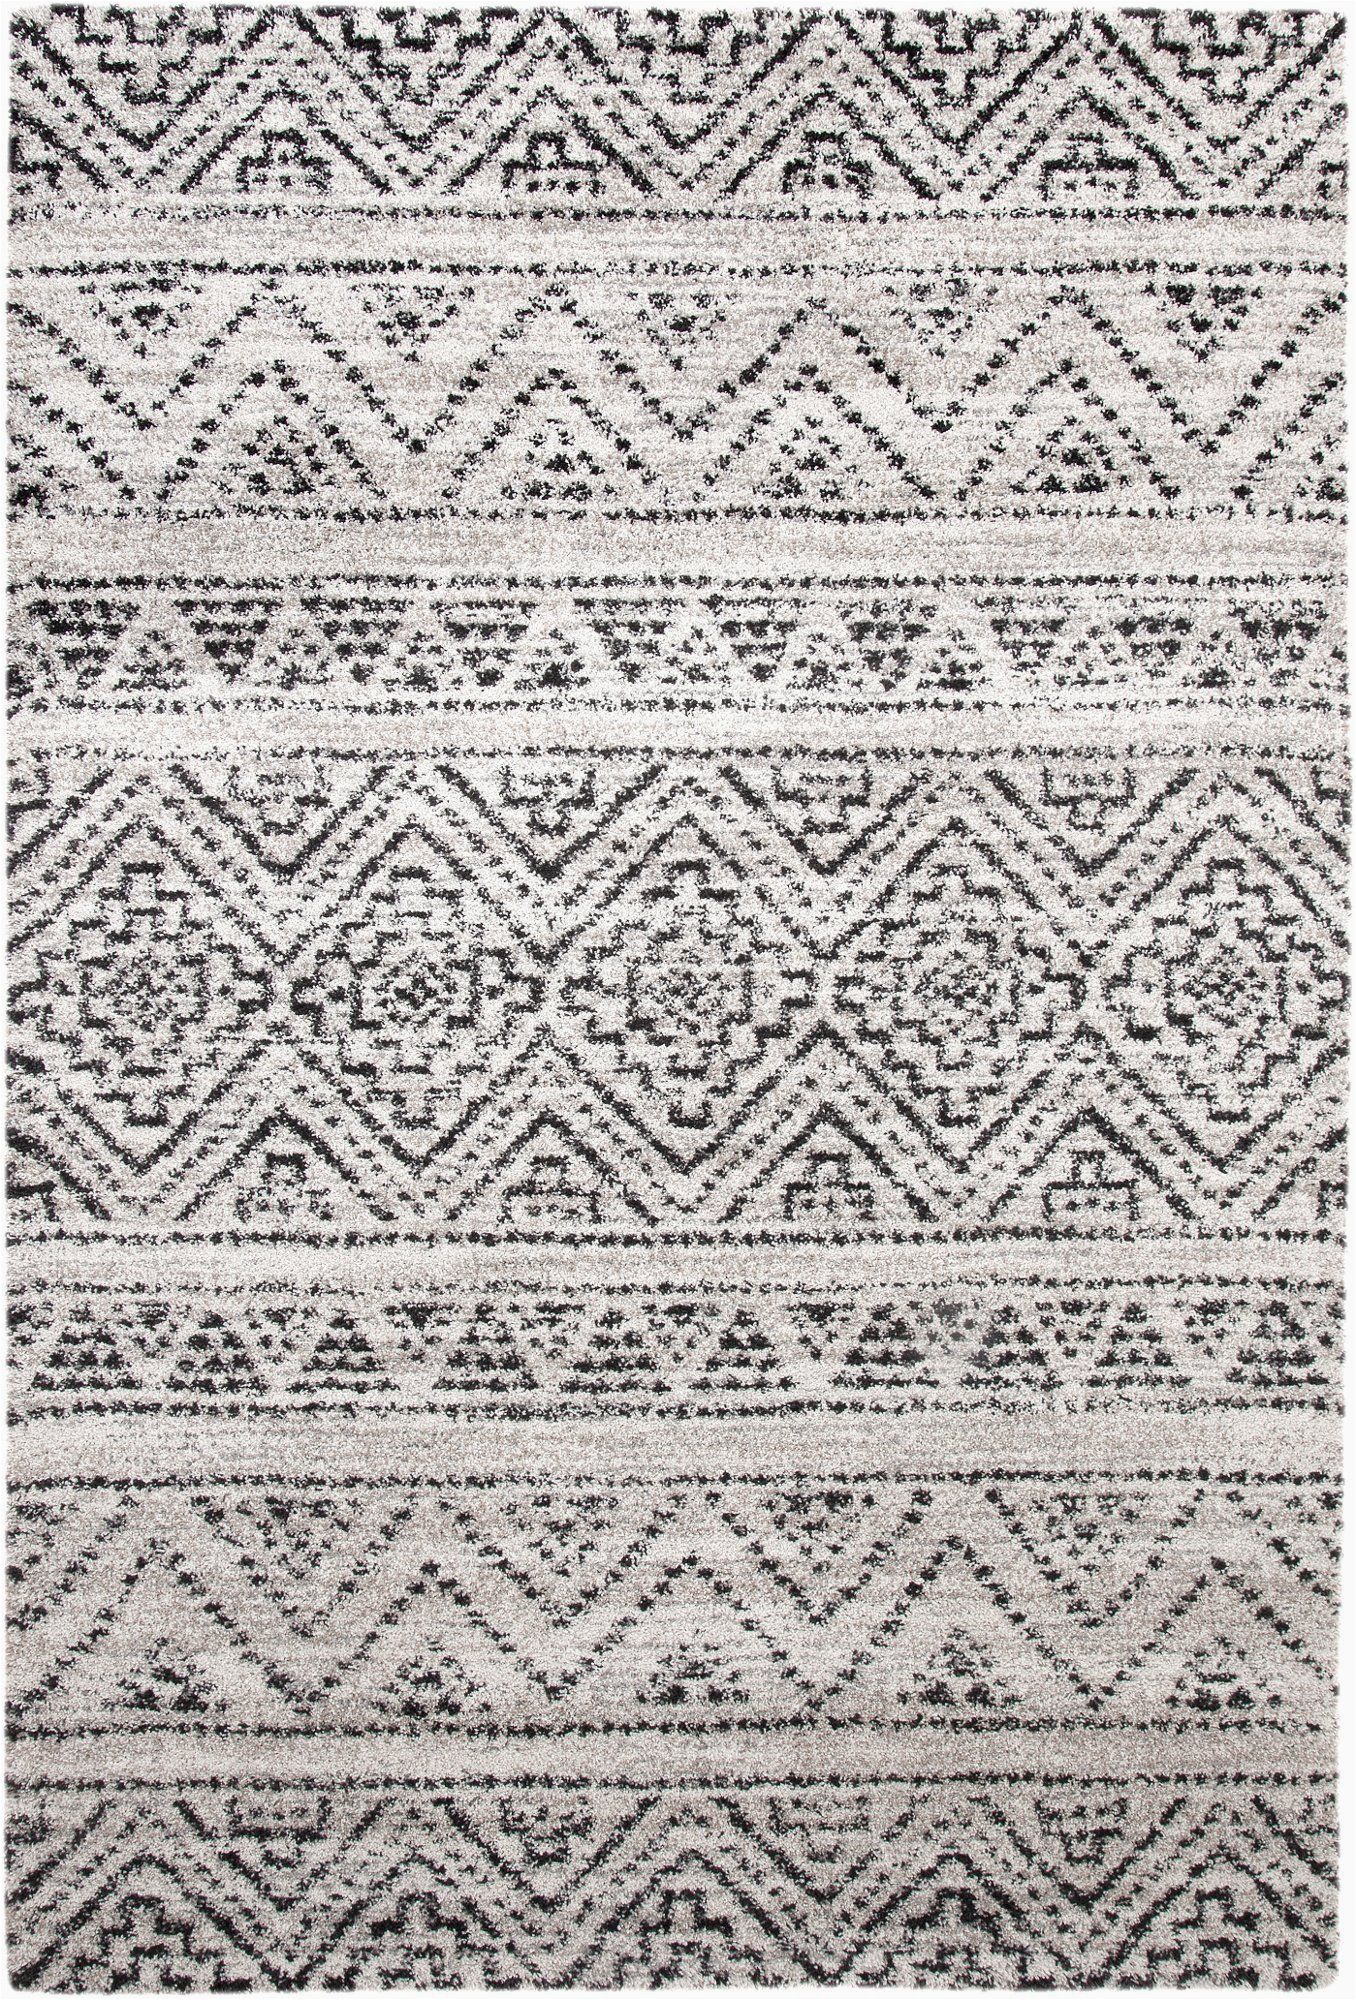 Area Rugs In Gray tones 5 X 8 Medium Beige Ivory and Charcoal Gray area Rug